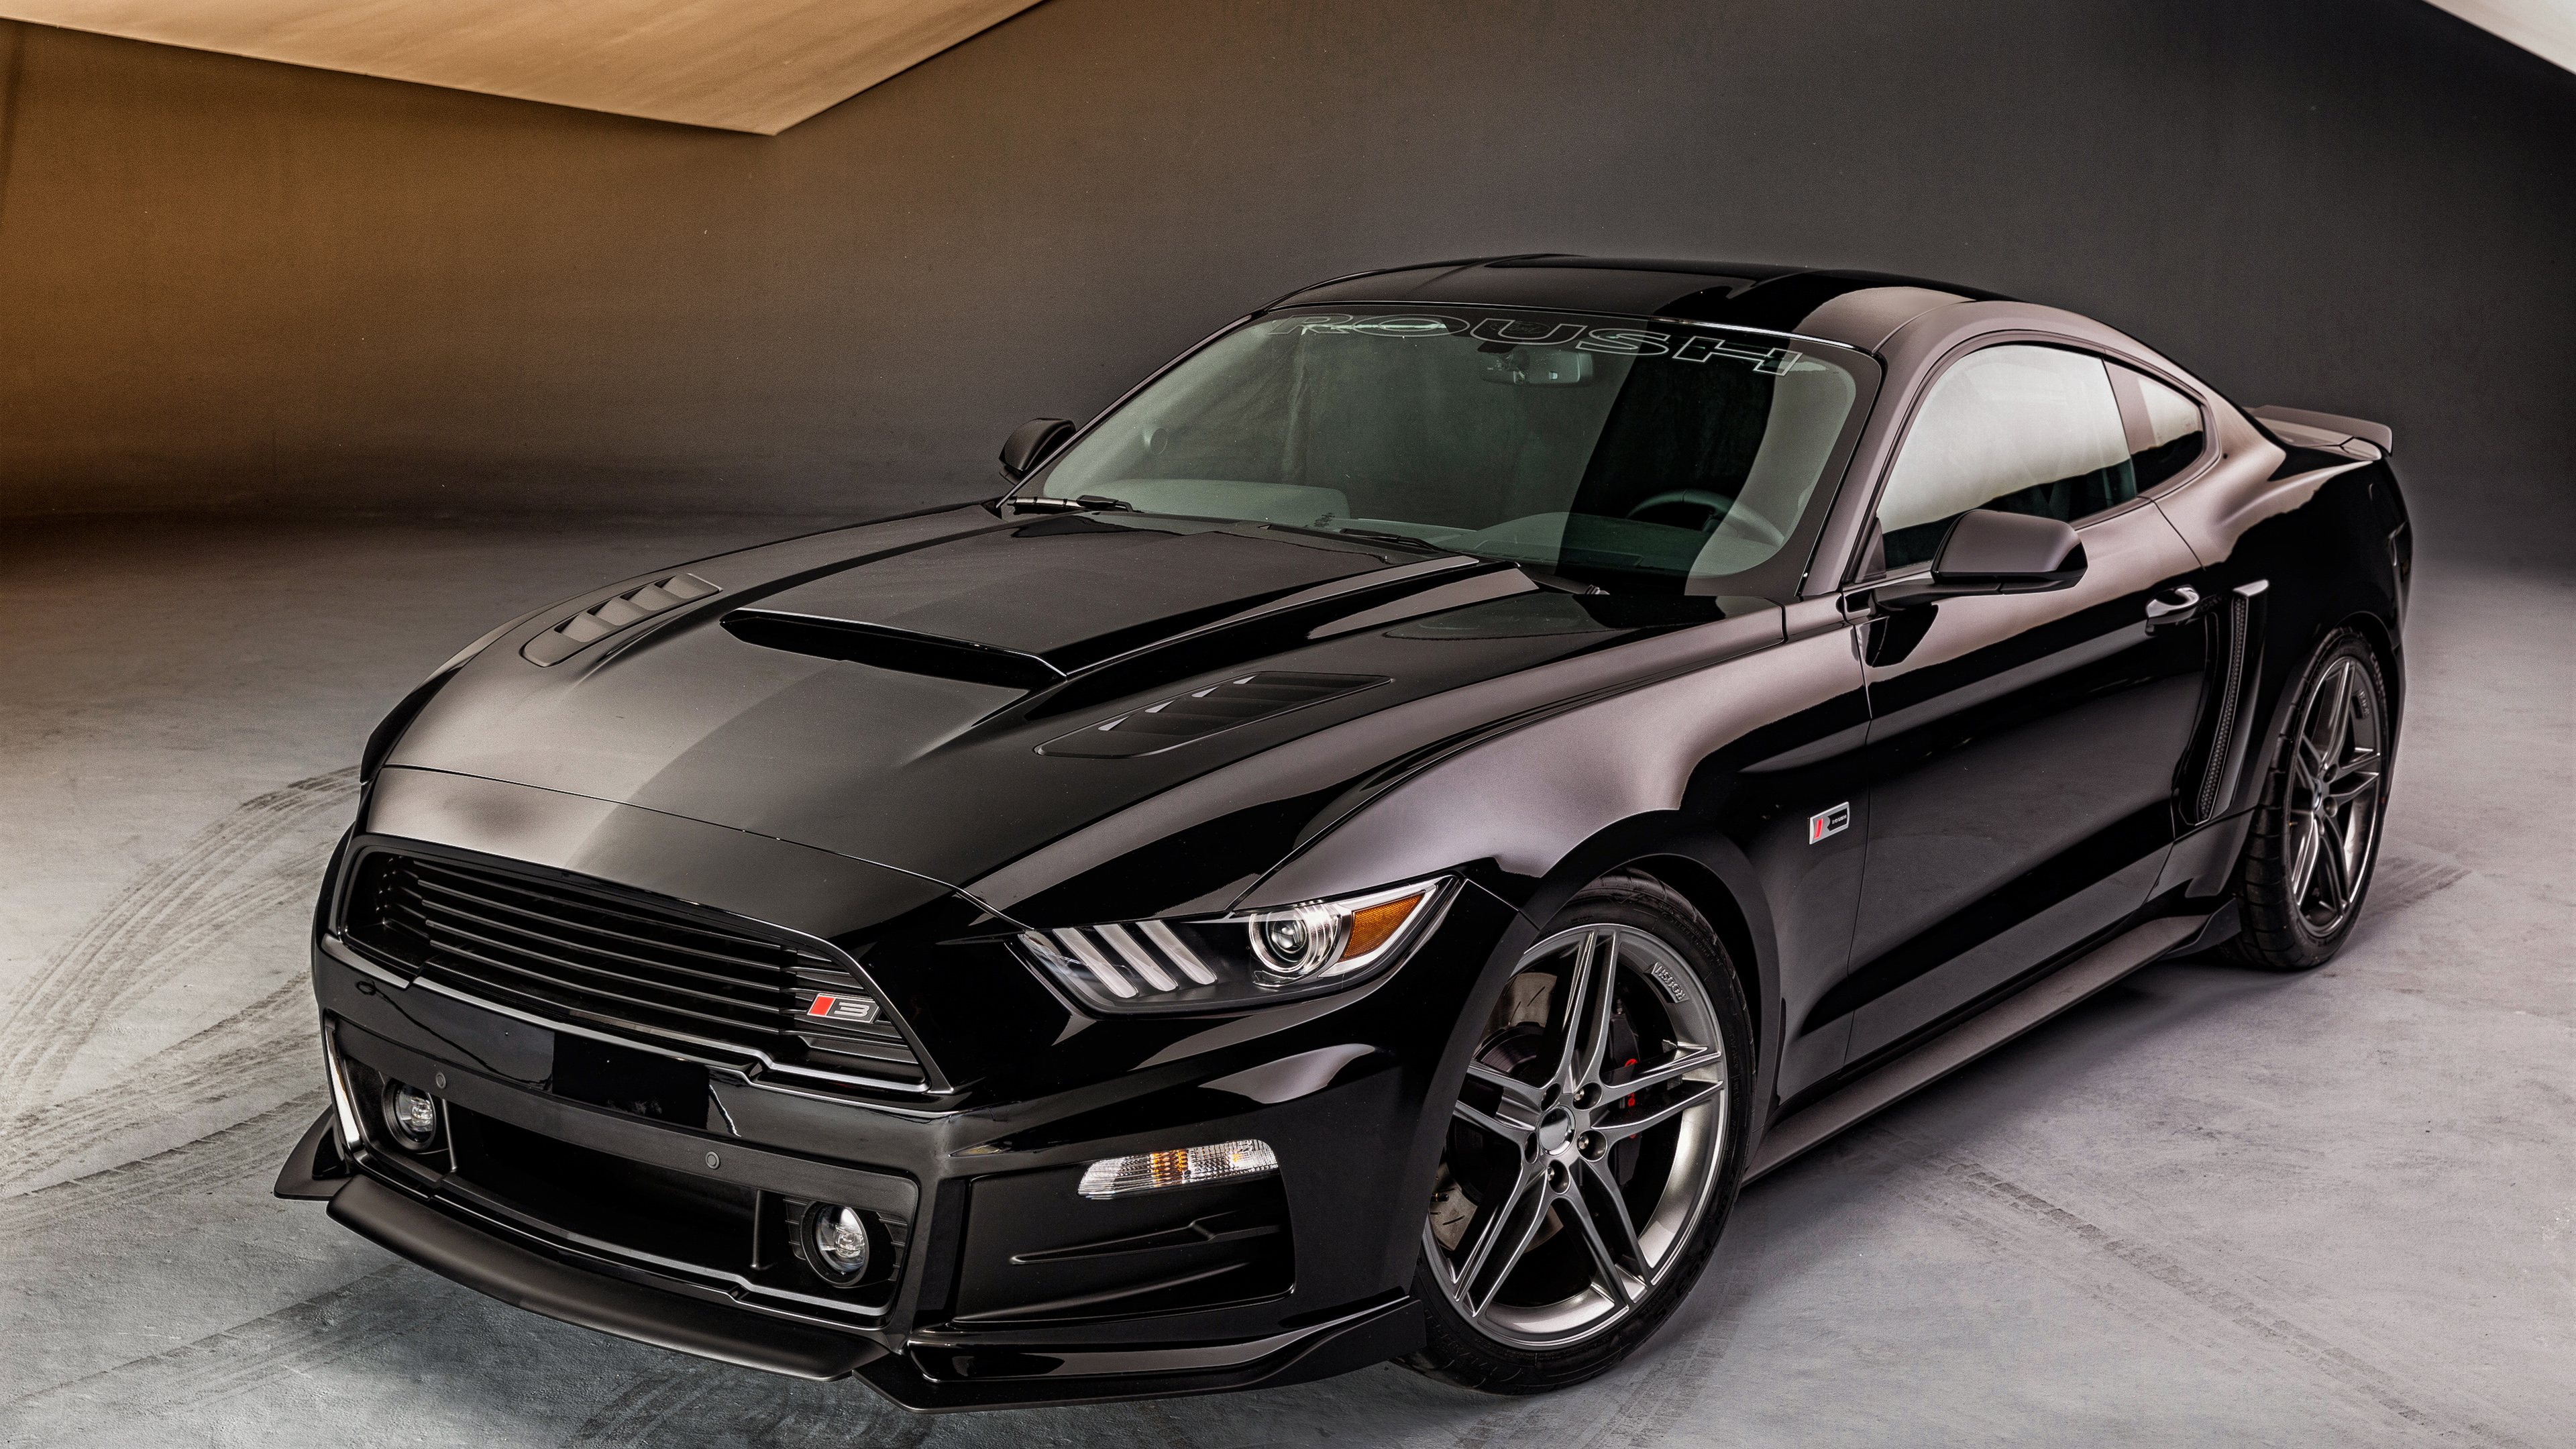 2015 Roush Ford Mustang RS Wallpaper | HD Car Wallpapers ...